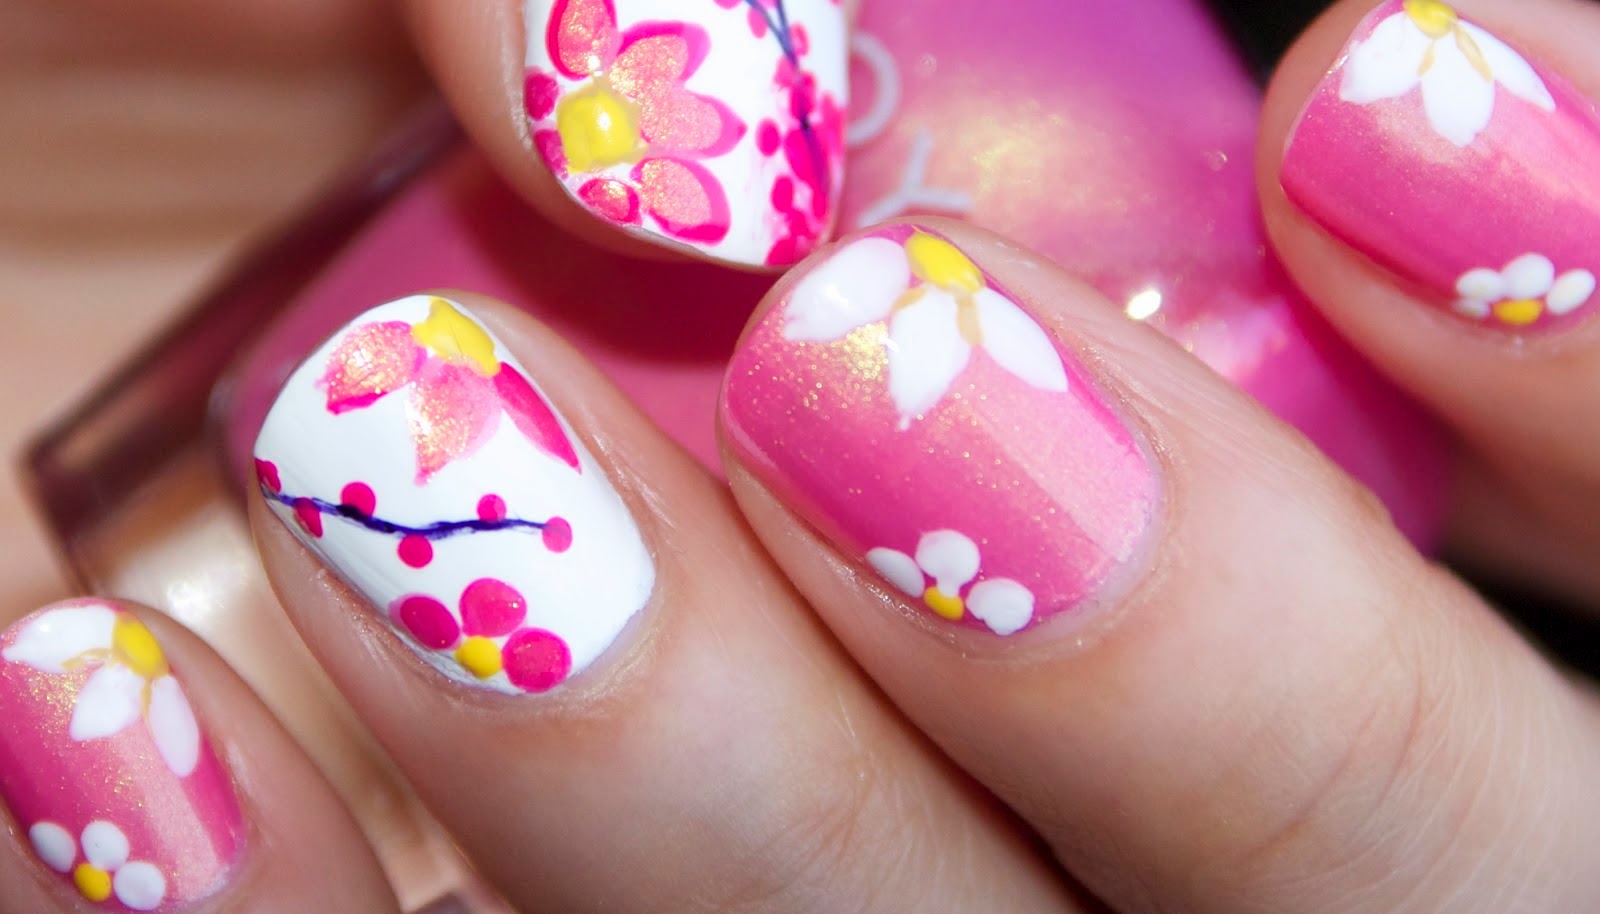 4. Blue and White Flower Nail Art - wide 6